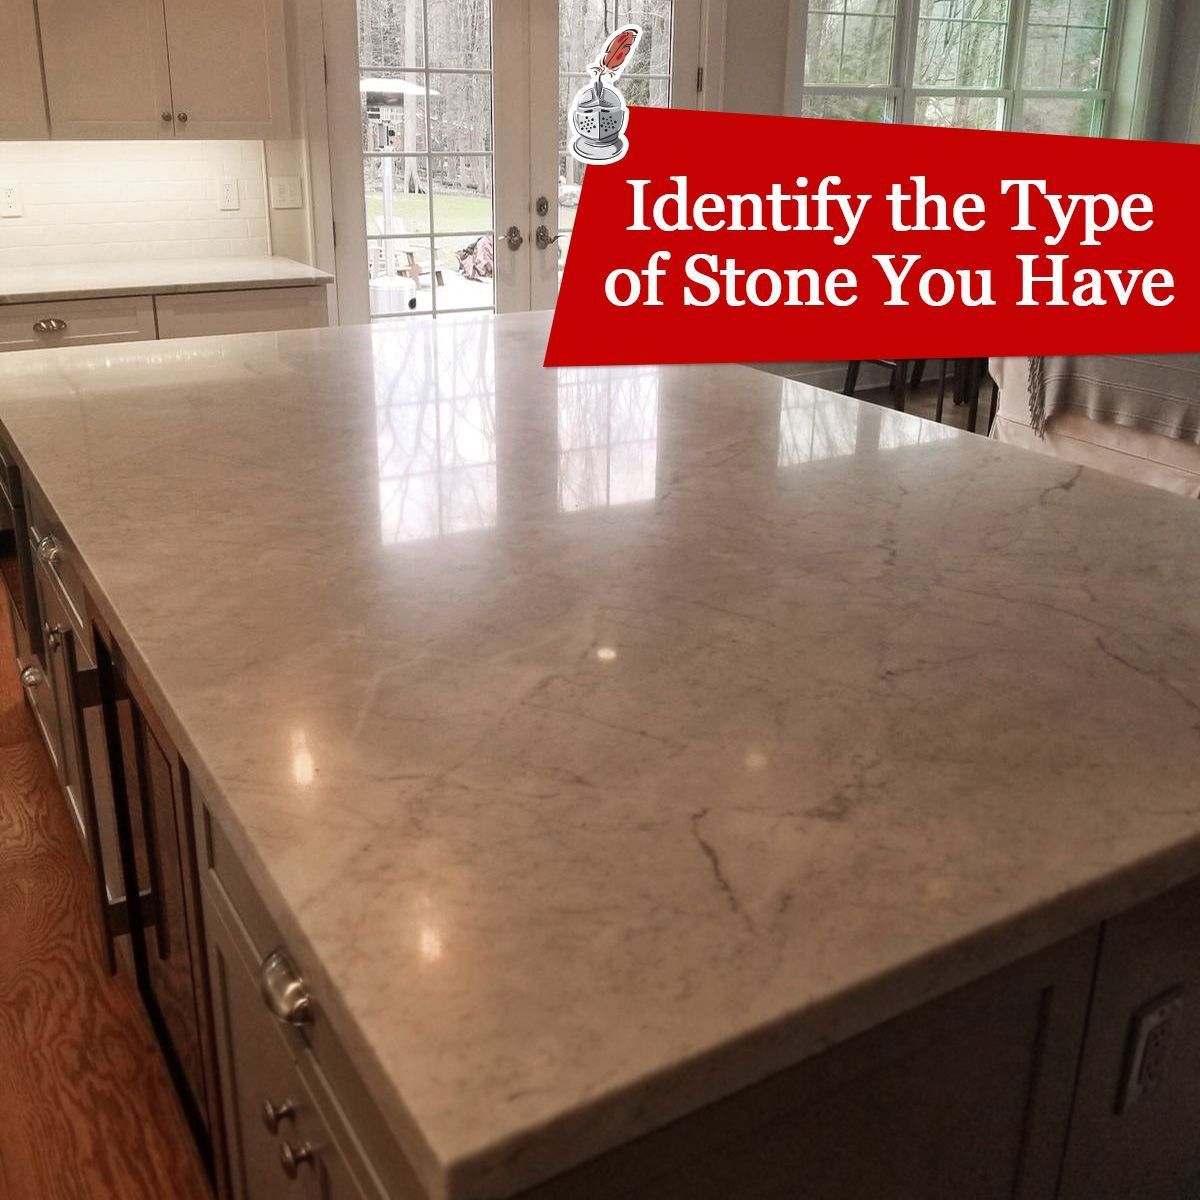 Identify the Type of Stone You Have